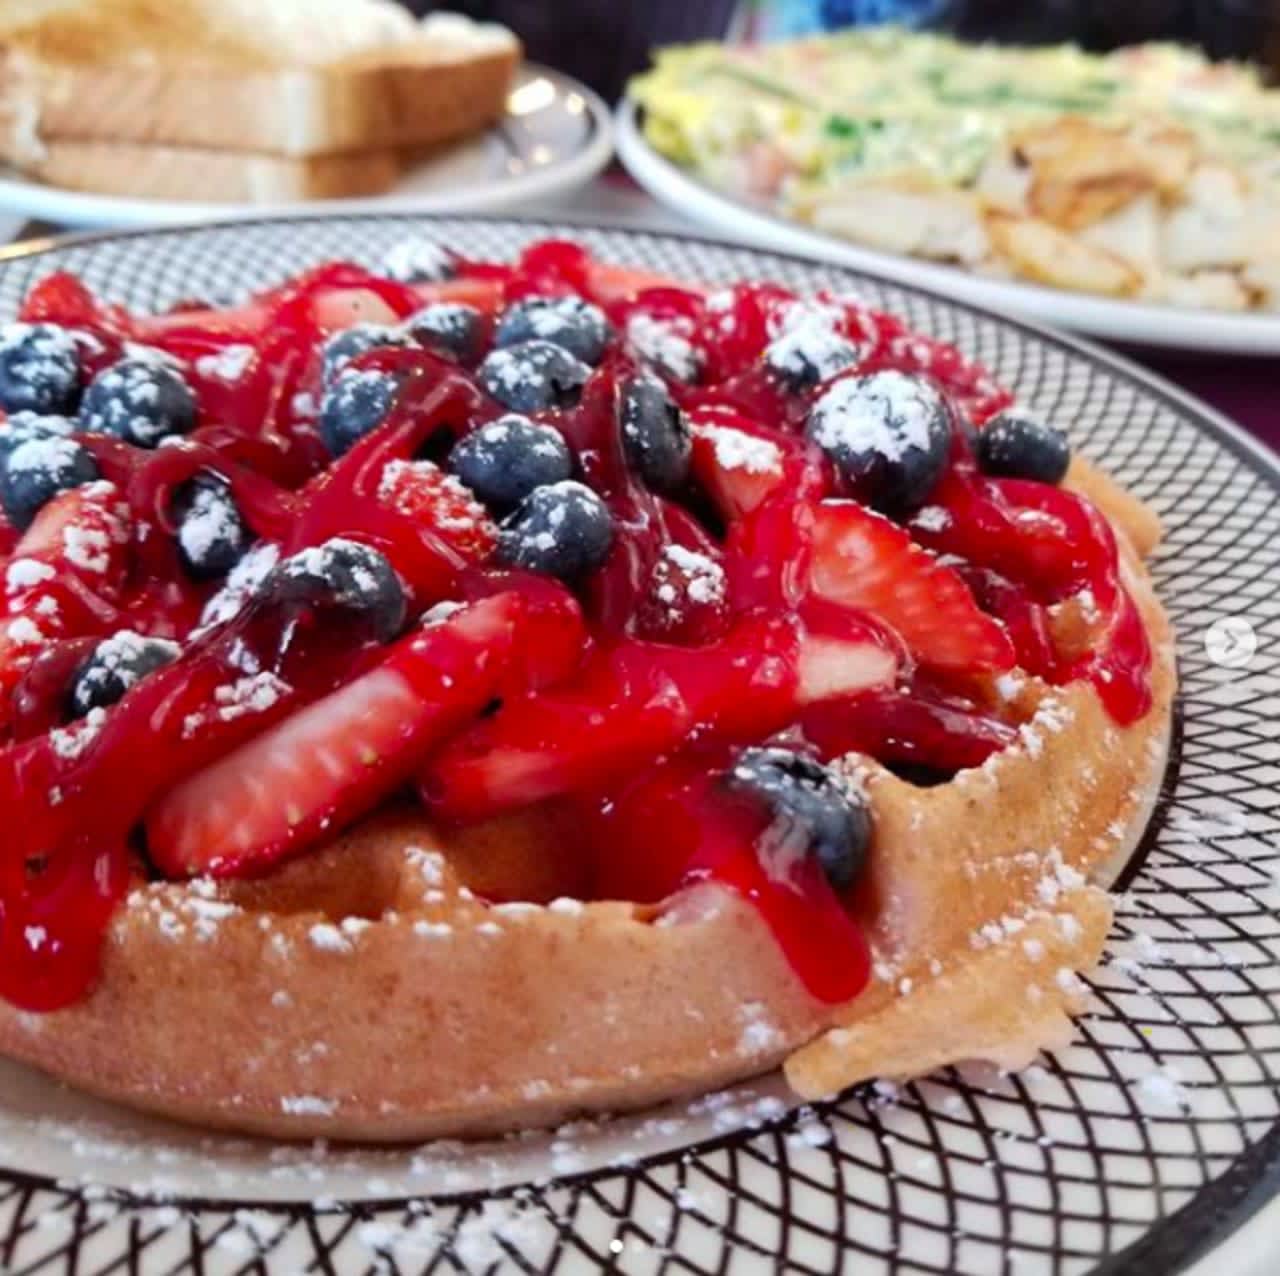 The Berry Berry Waffle from JJ's Diner in Pleasantville